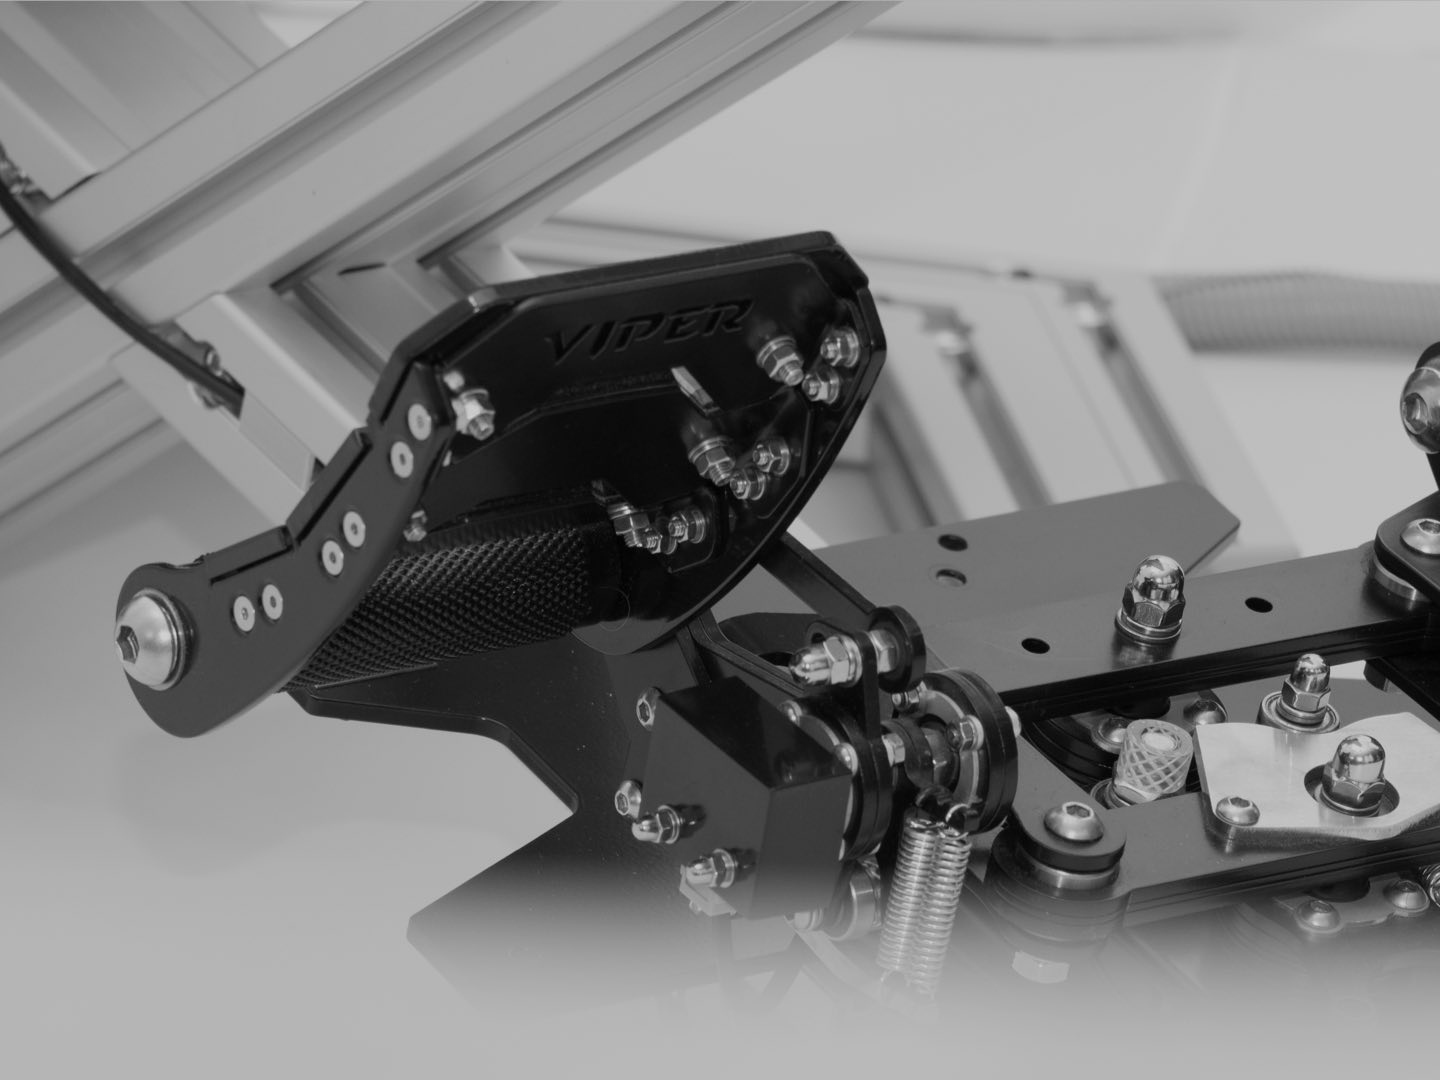 The ONYXJET MK3 flight simulator cockpit frame is equipped with RX Viper V2 full metal rudder pedals by Slaw Device